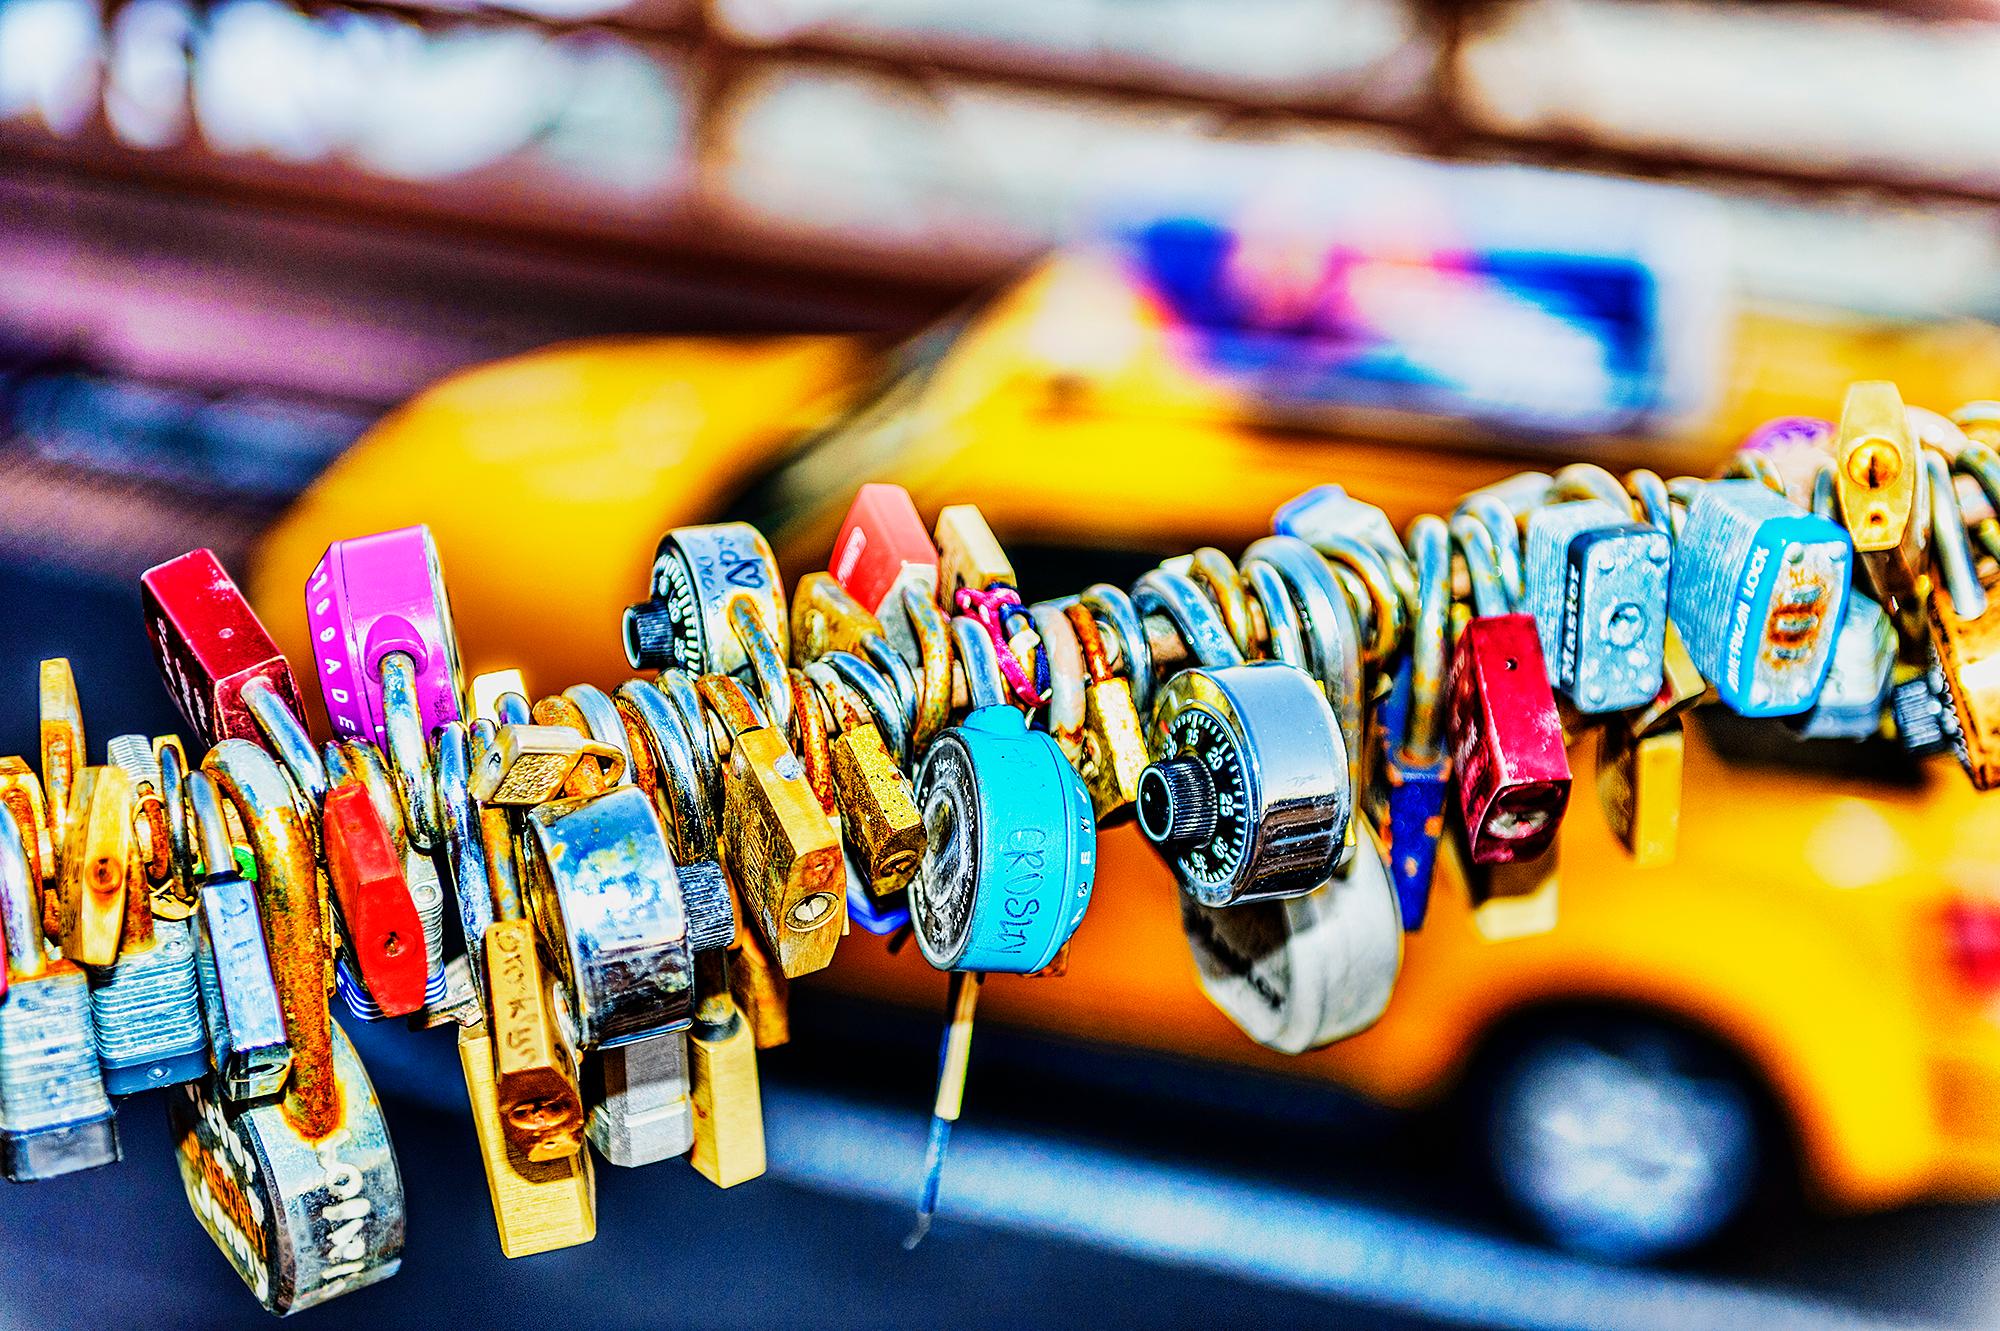 Colorful locks hanging from a wire above the Brooklyn Bridge are set against a blurred yellow 
New York City Taxi Cab.  They form an unexpected ambiguous abstract image composed of intersecting diagonal planes.   There is a great diversity of locks